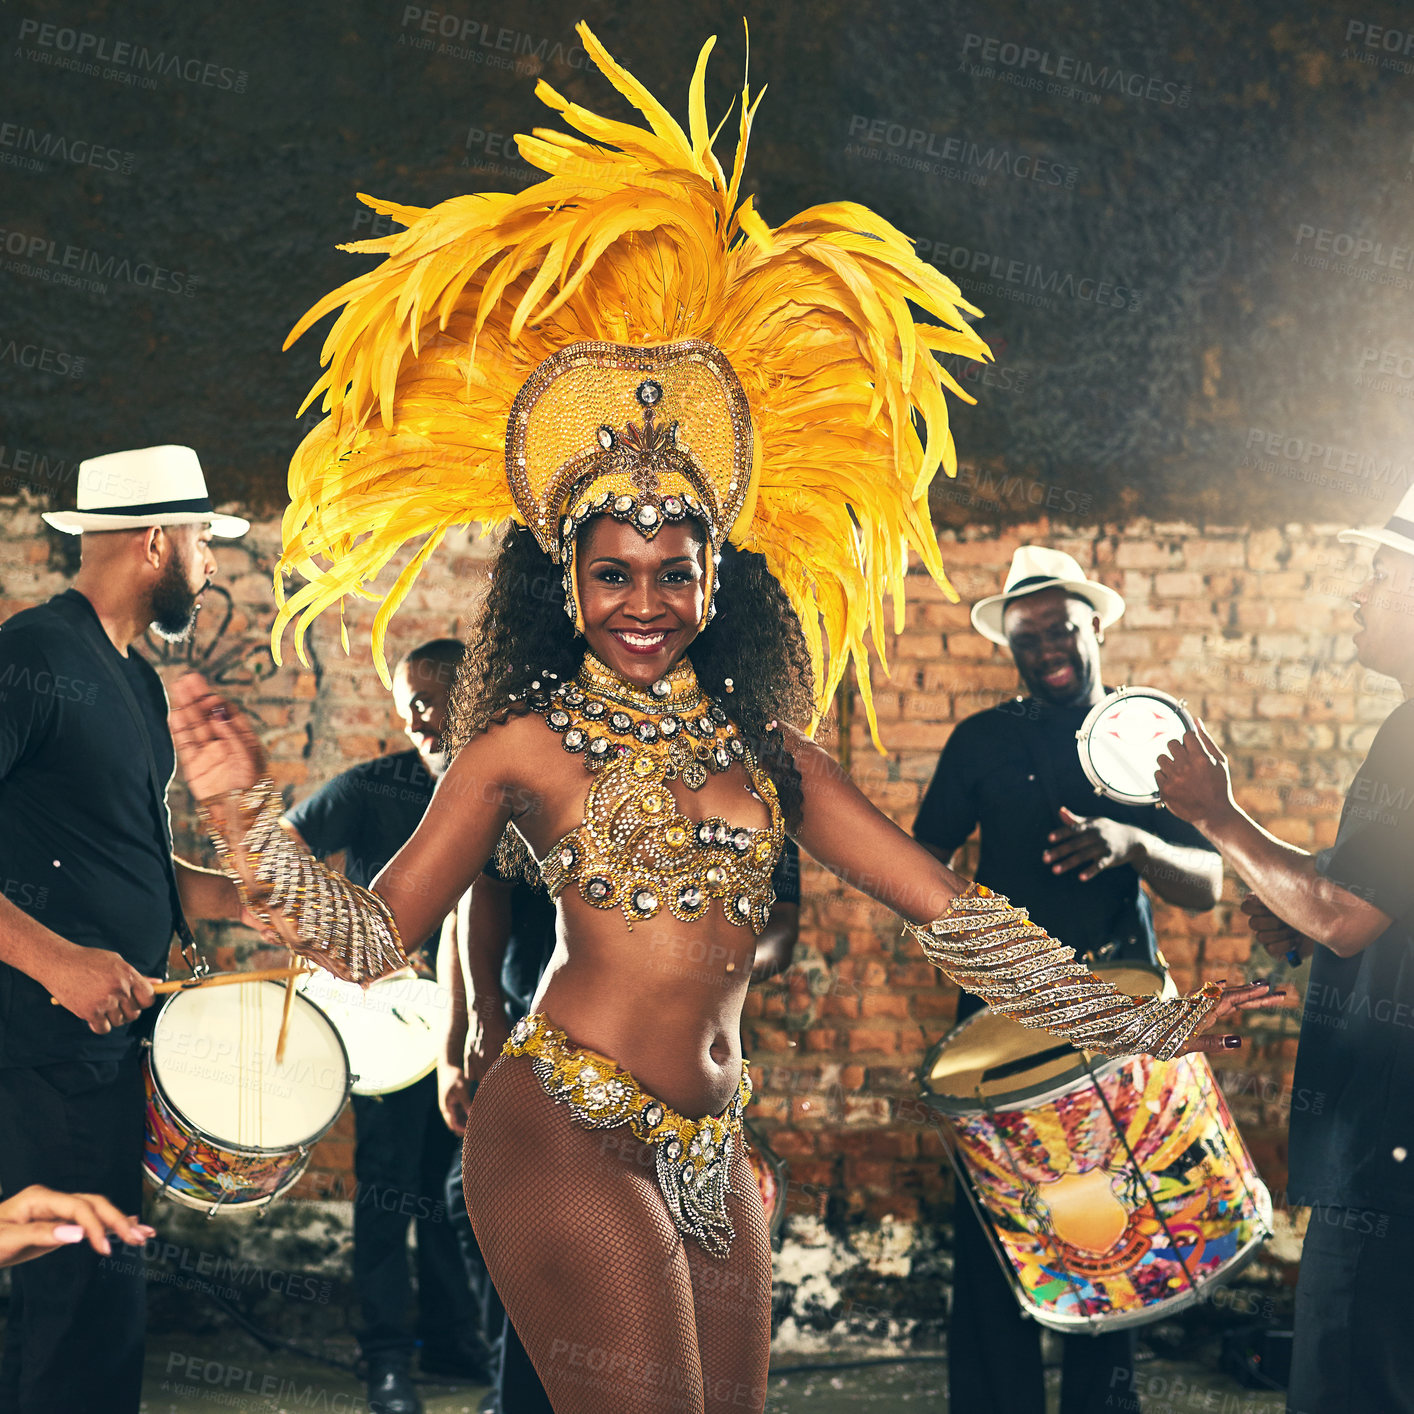 Buy stock photo Samba, dance and black woman at Carnival to celebrate, night energy and holiday party in Rio de Janeiro, Brazil. Street band, music smile and portrait of a dancer at an outdoor festival dancing